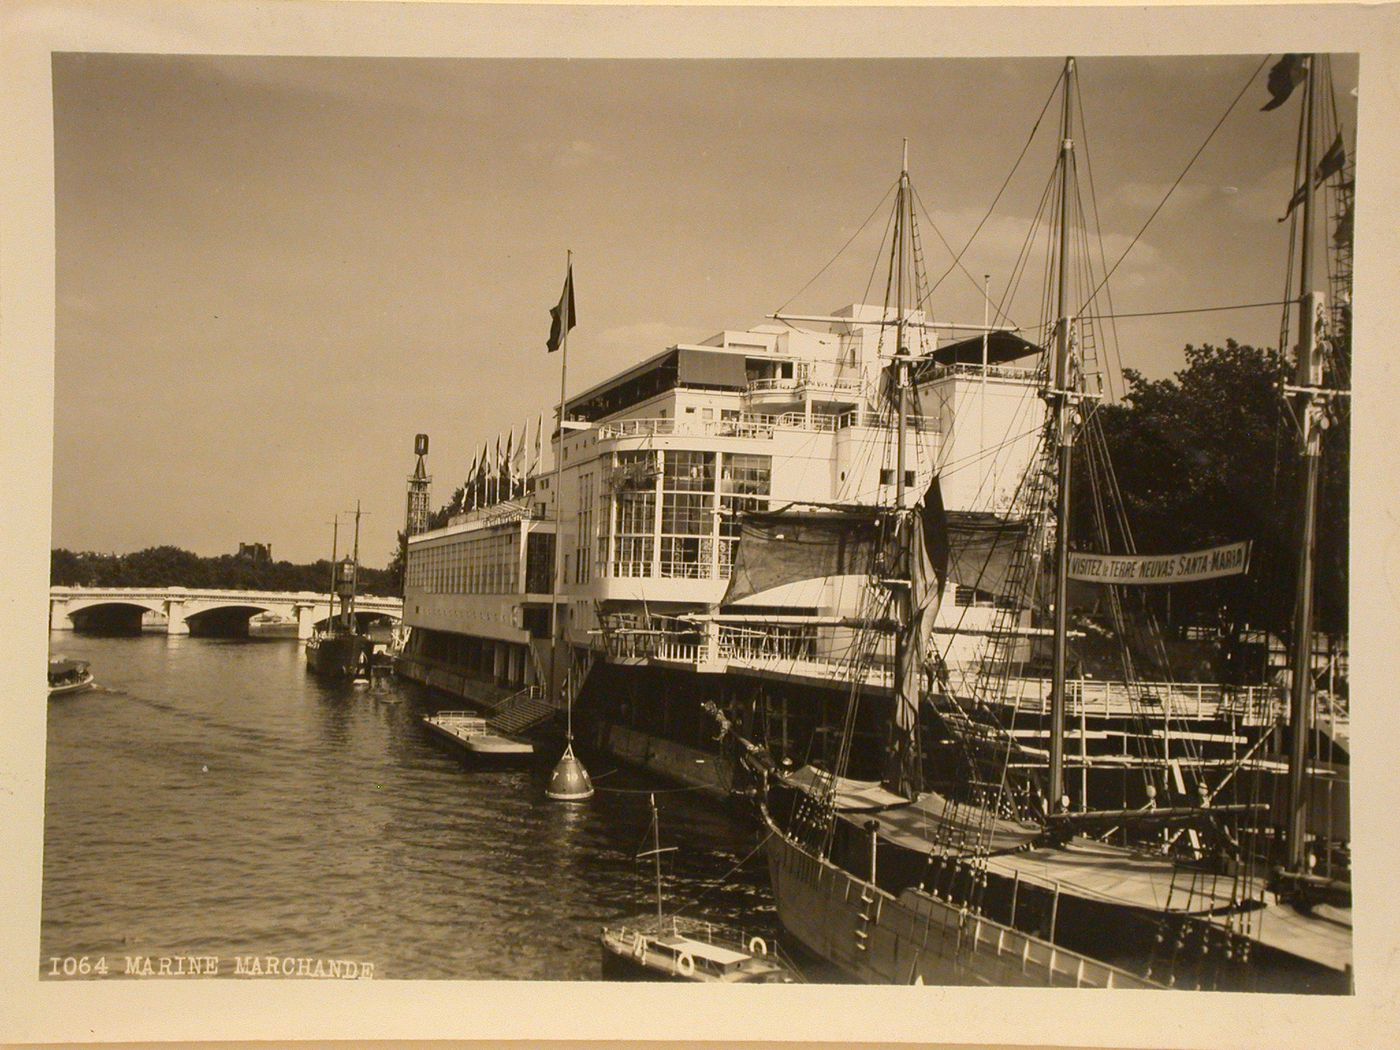 View of the Pavillon de la Marine Marchande with the Seine in the foreground, 1937 Exposition internationale, Paris, France